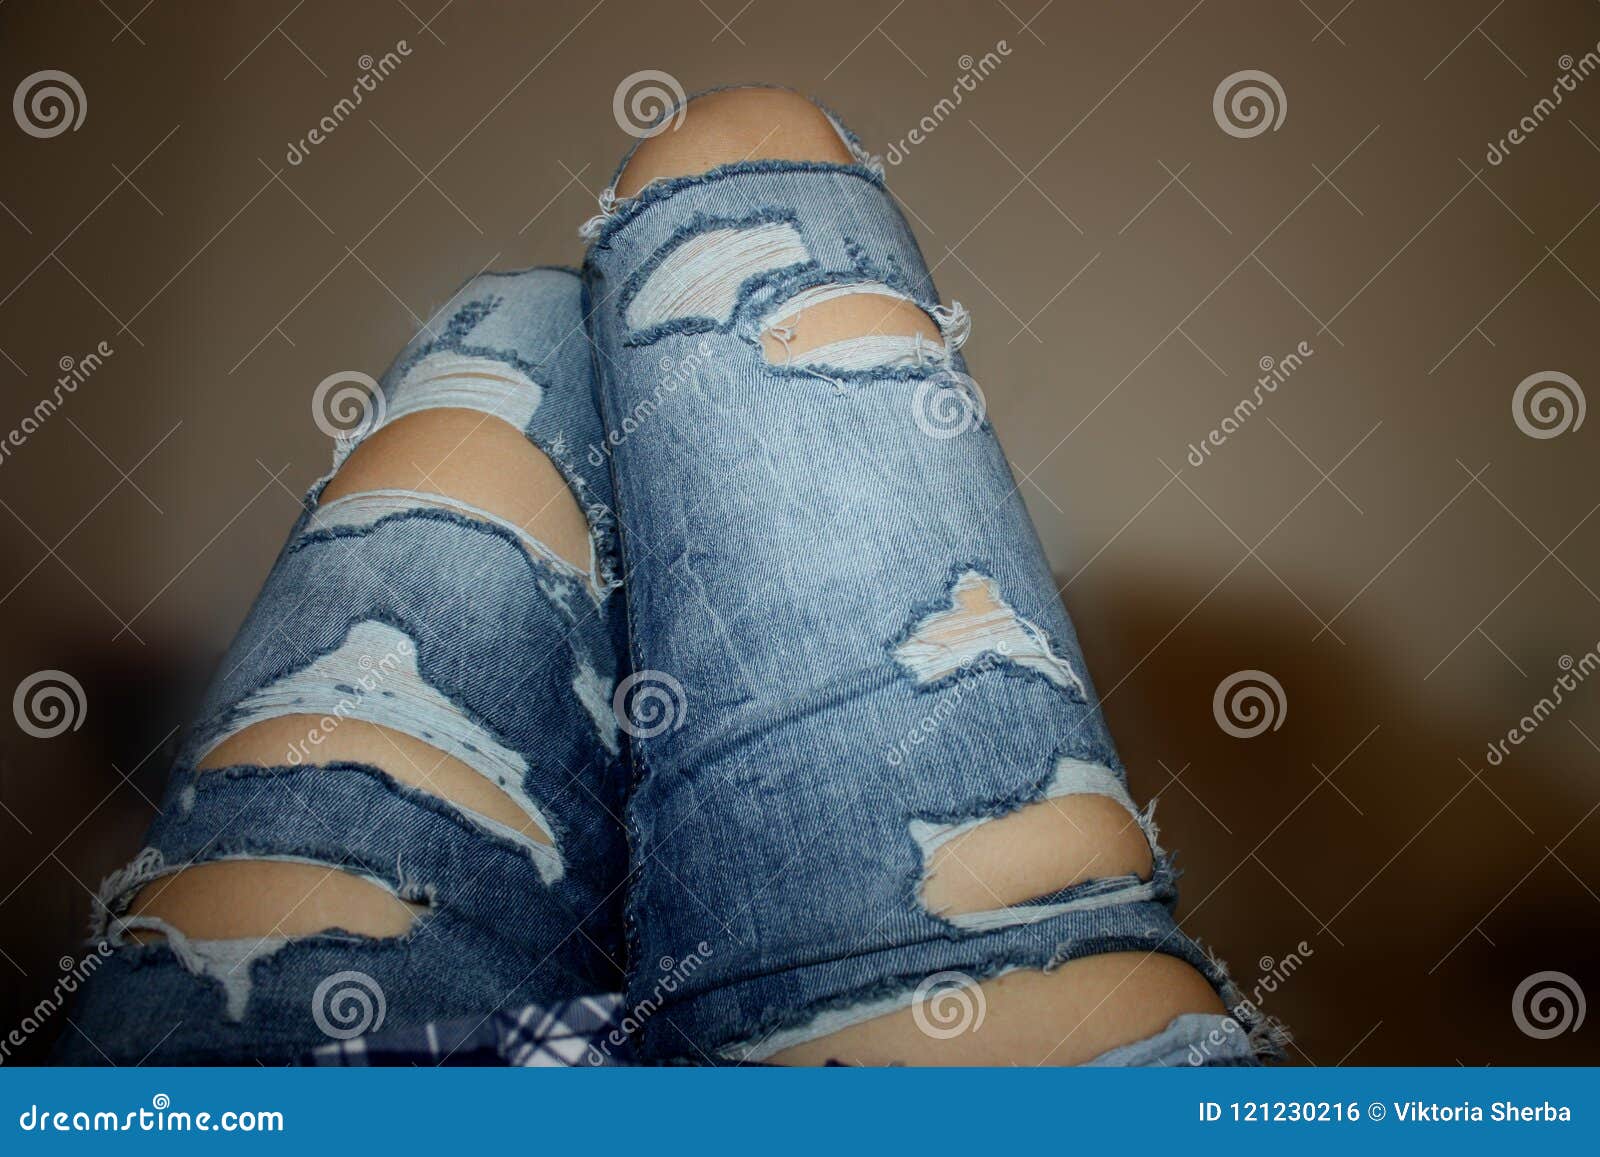 The Girl Legs in Ripped Jeans Stock Photo - Image of girl, body: 121230216